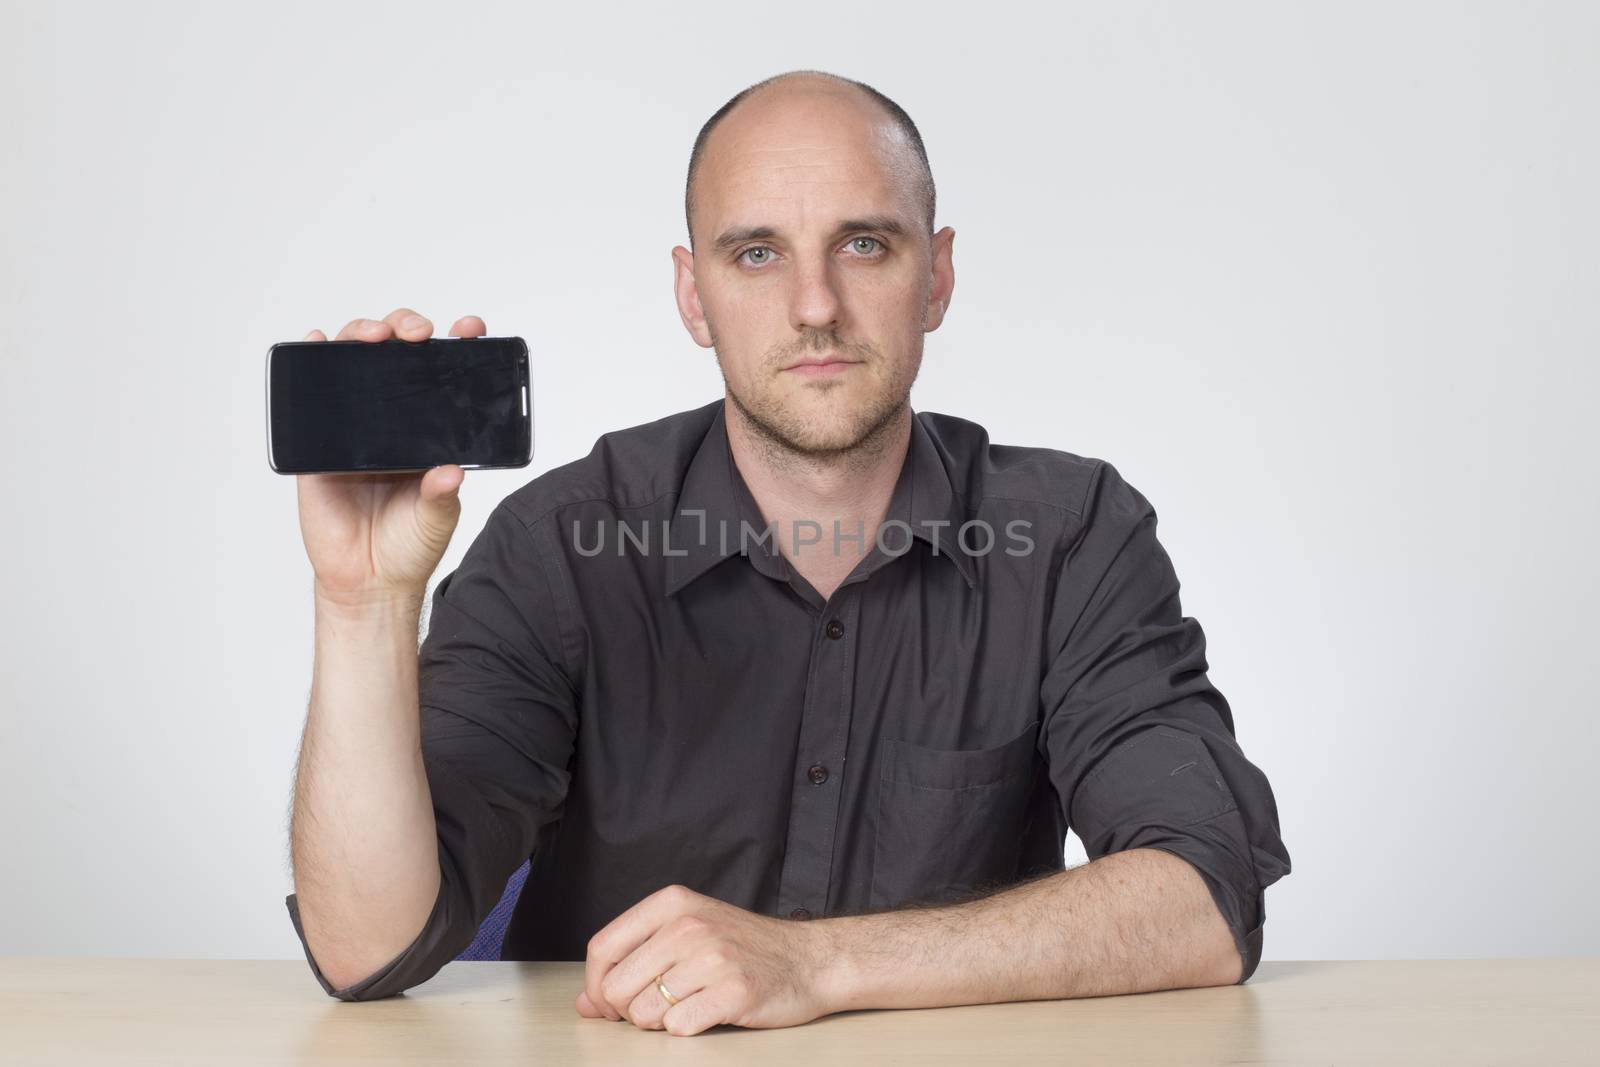 Man holds up phone to show screen